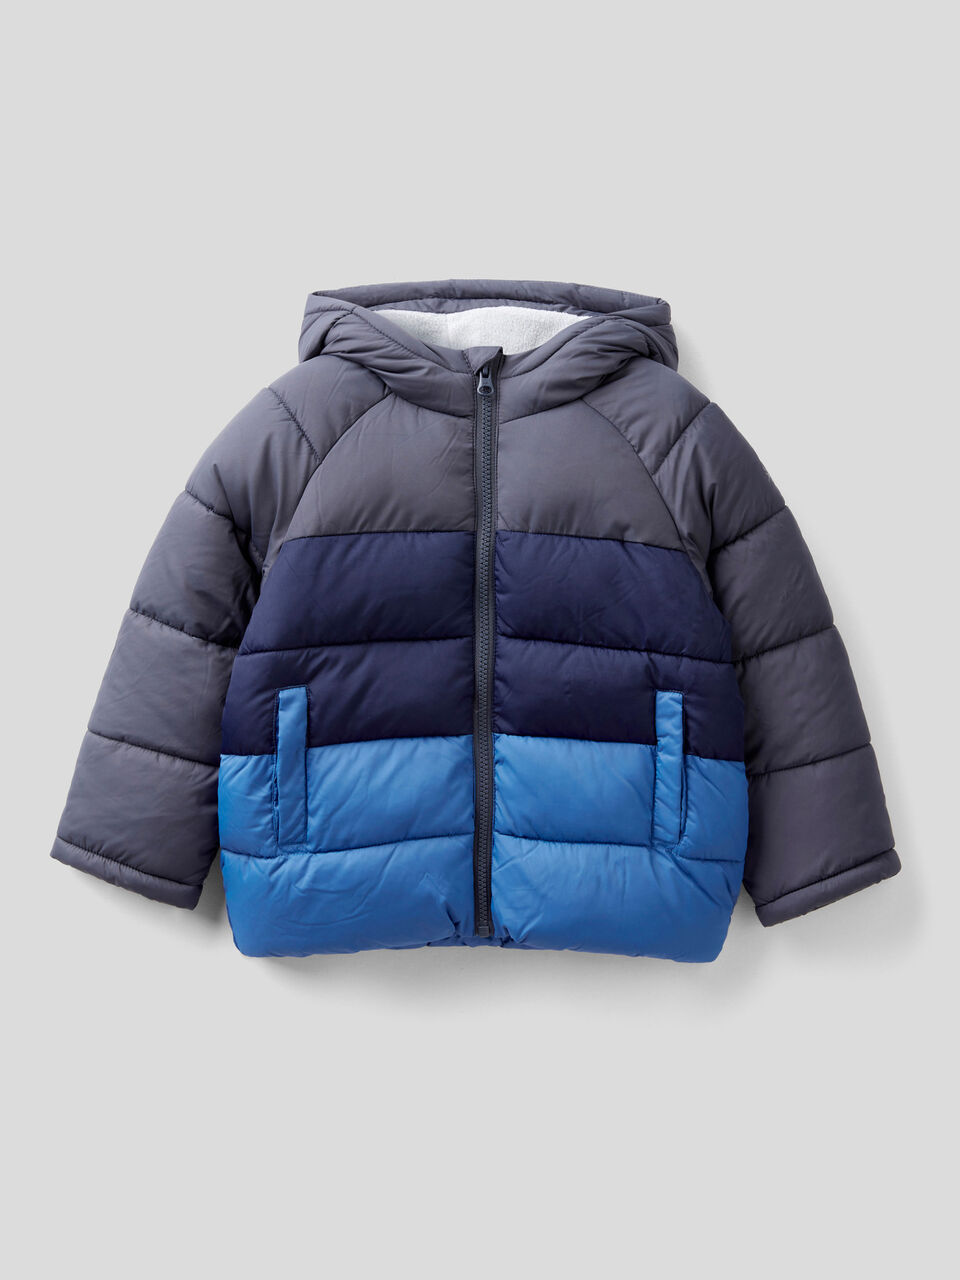 Inflatable Puffer Jacket by Racer Worldwide®